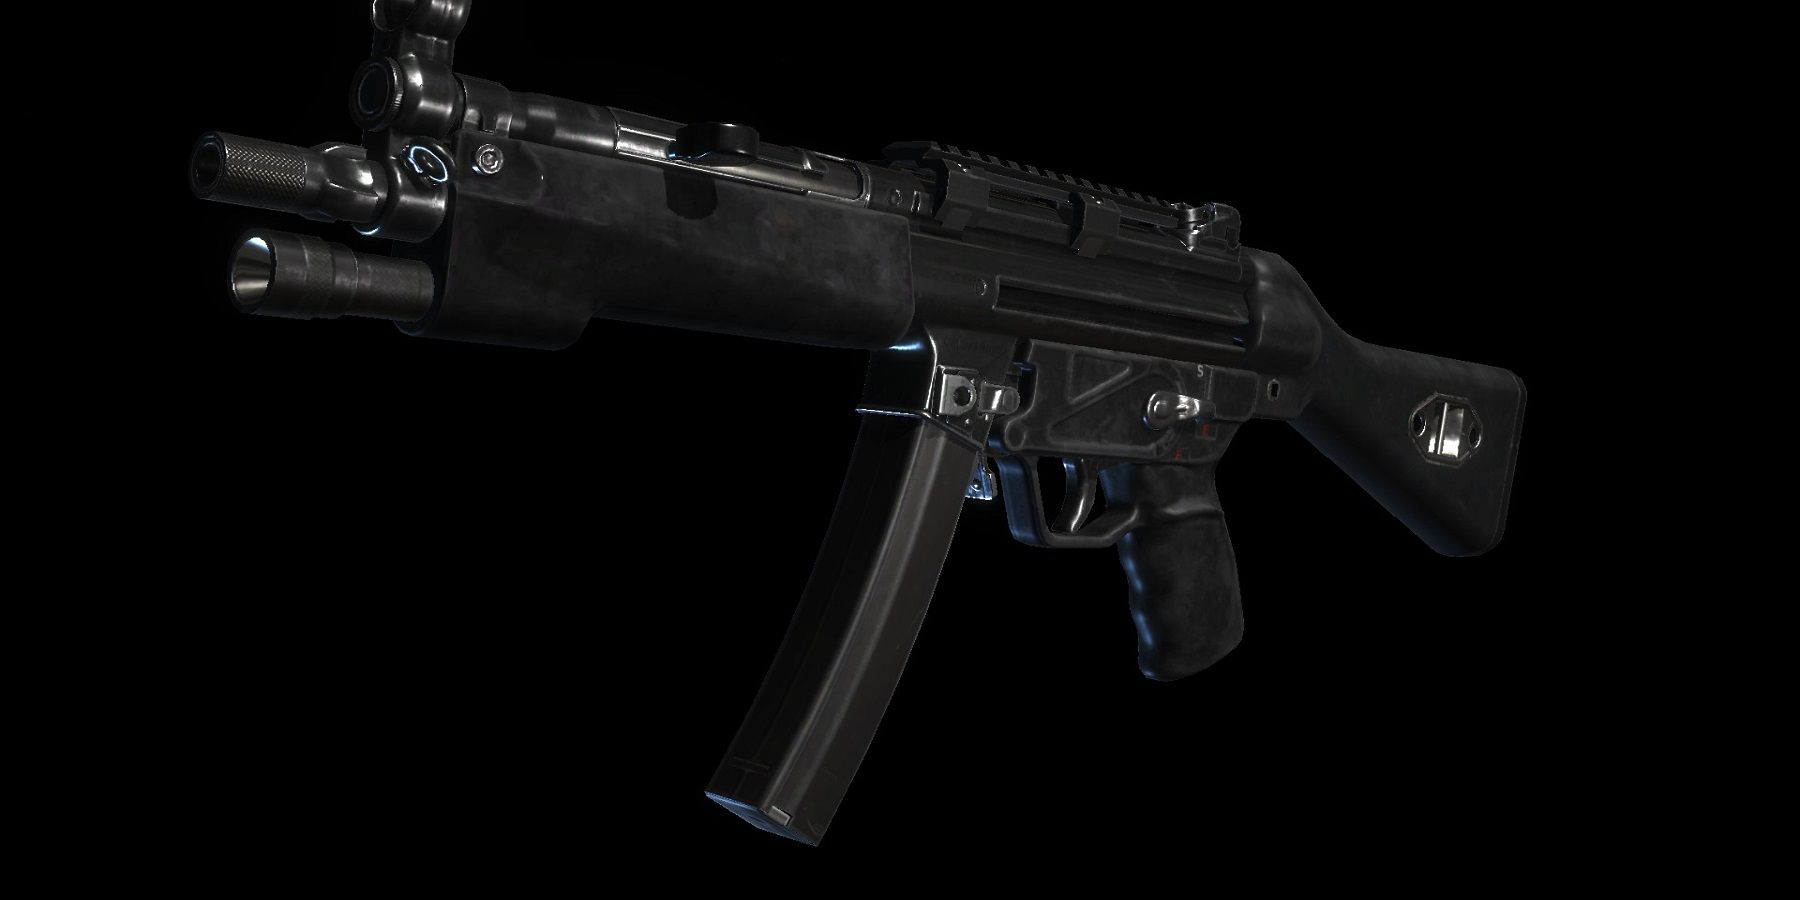 The MP5 from Combat Master.